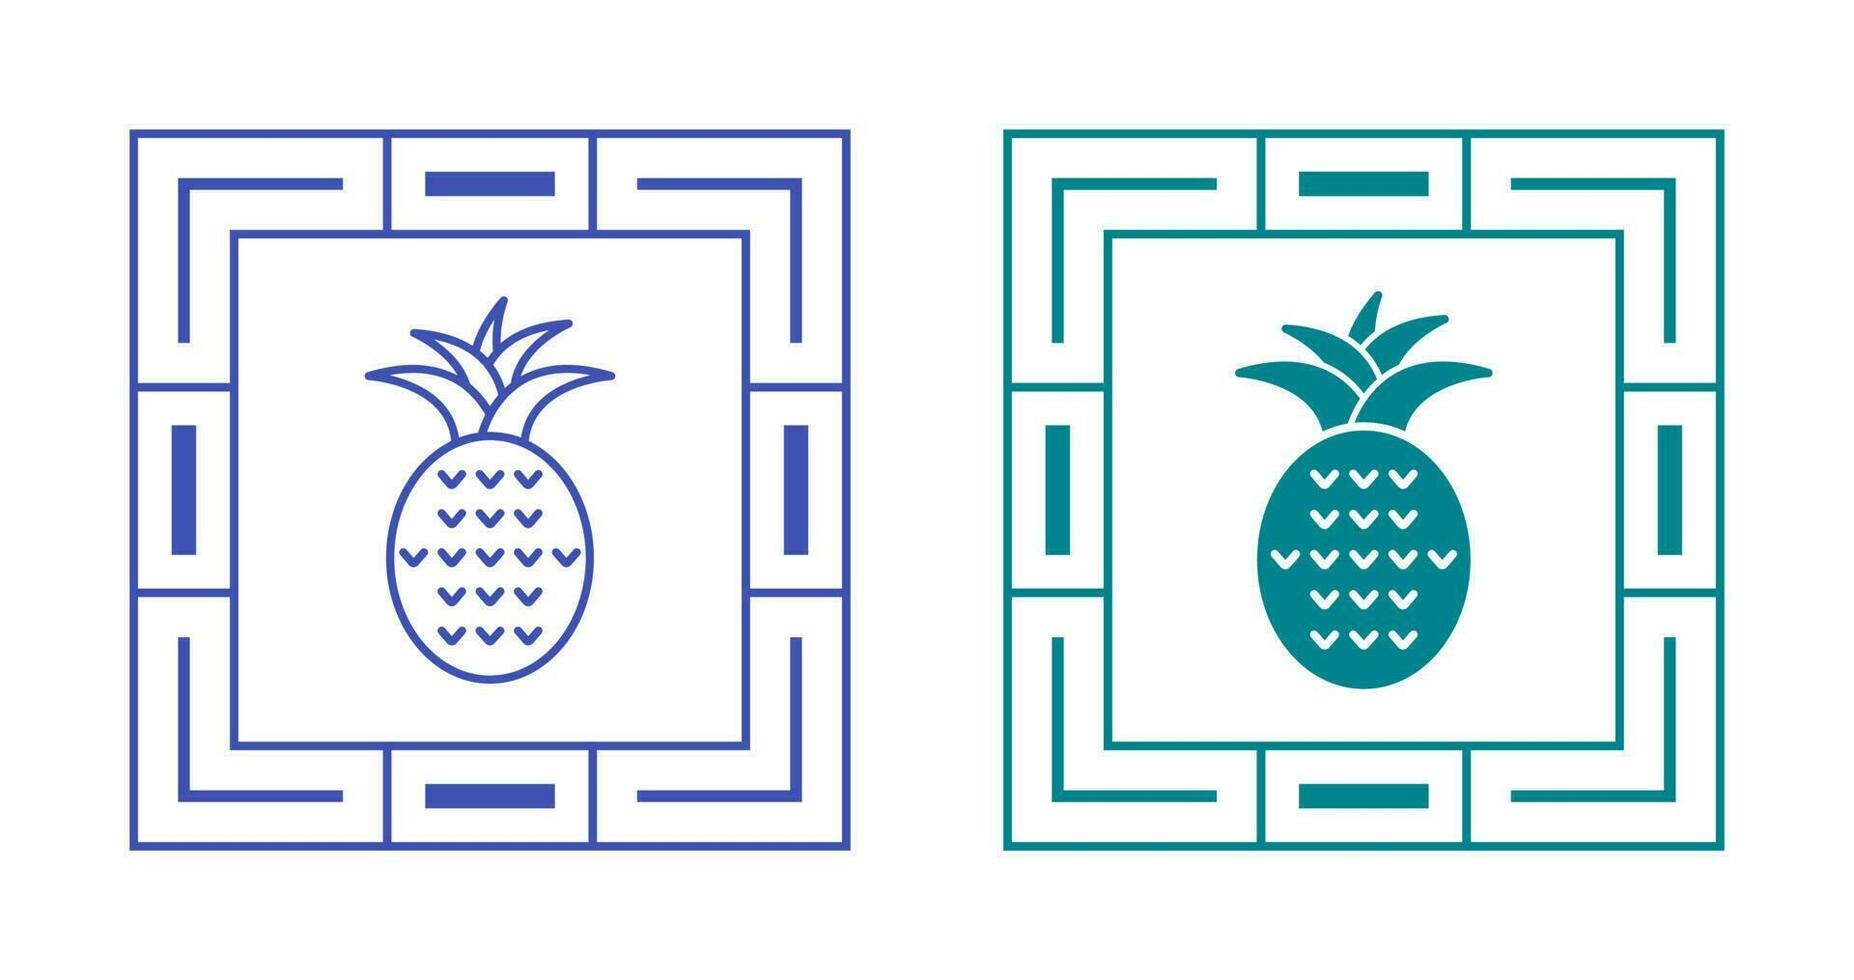 ananas vector icoon